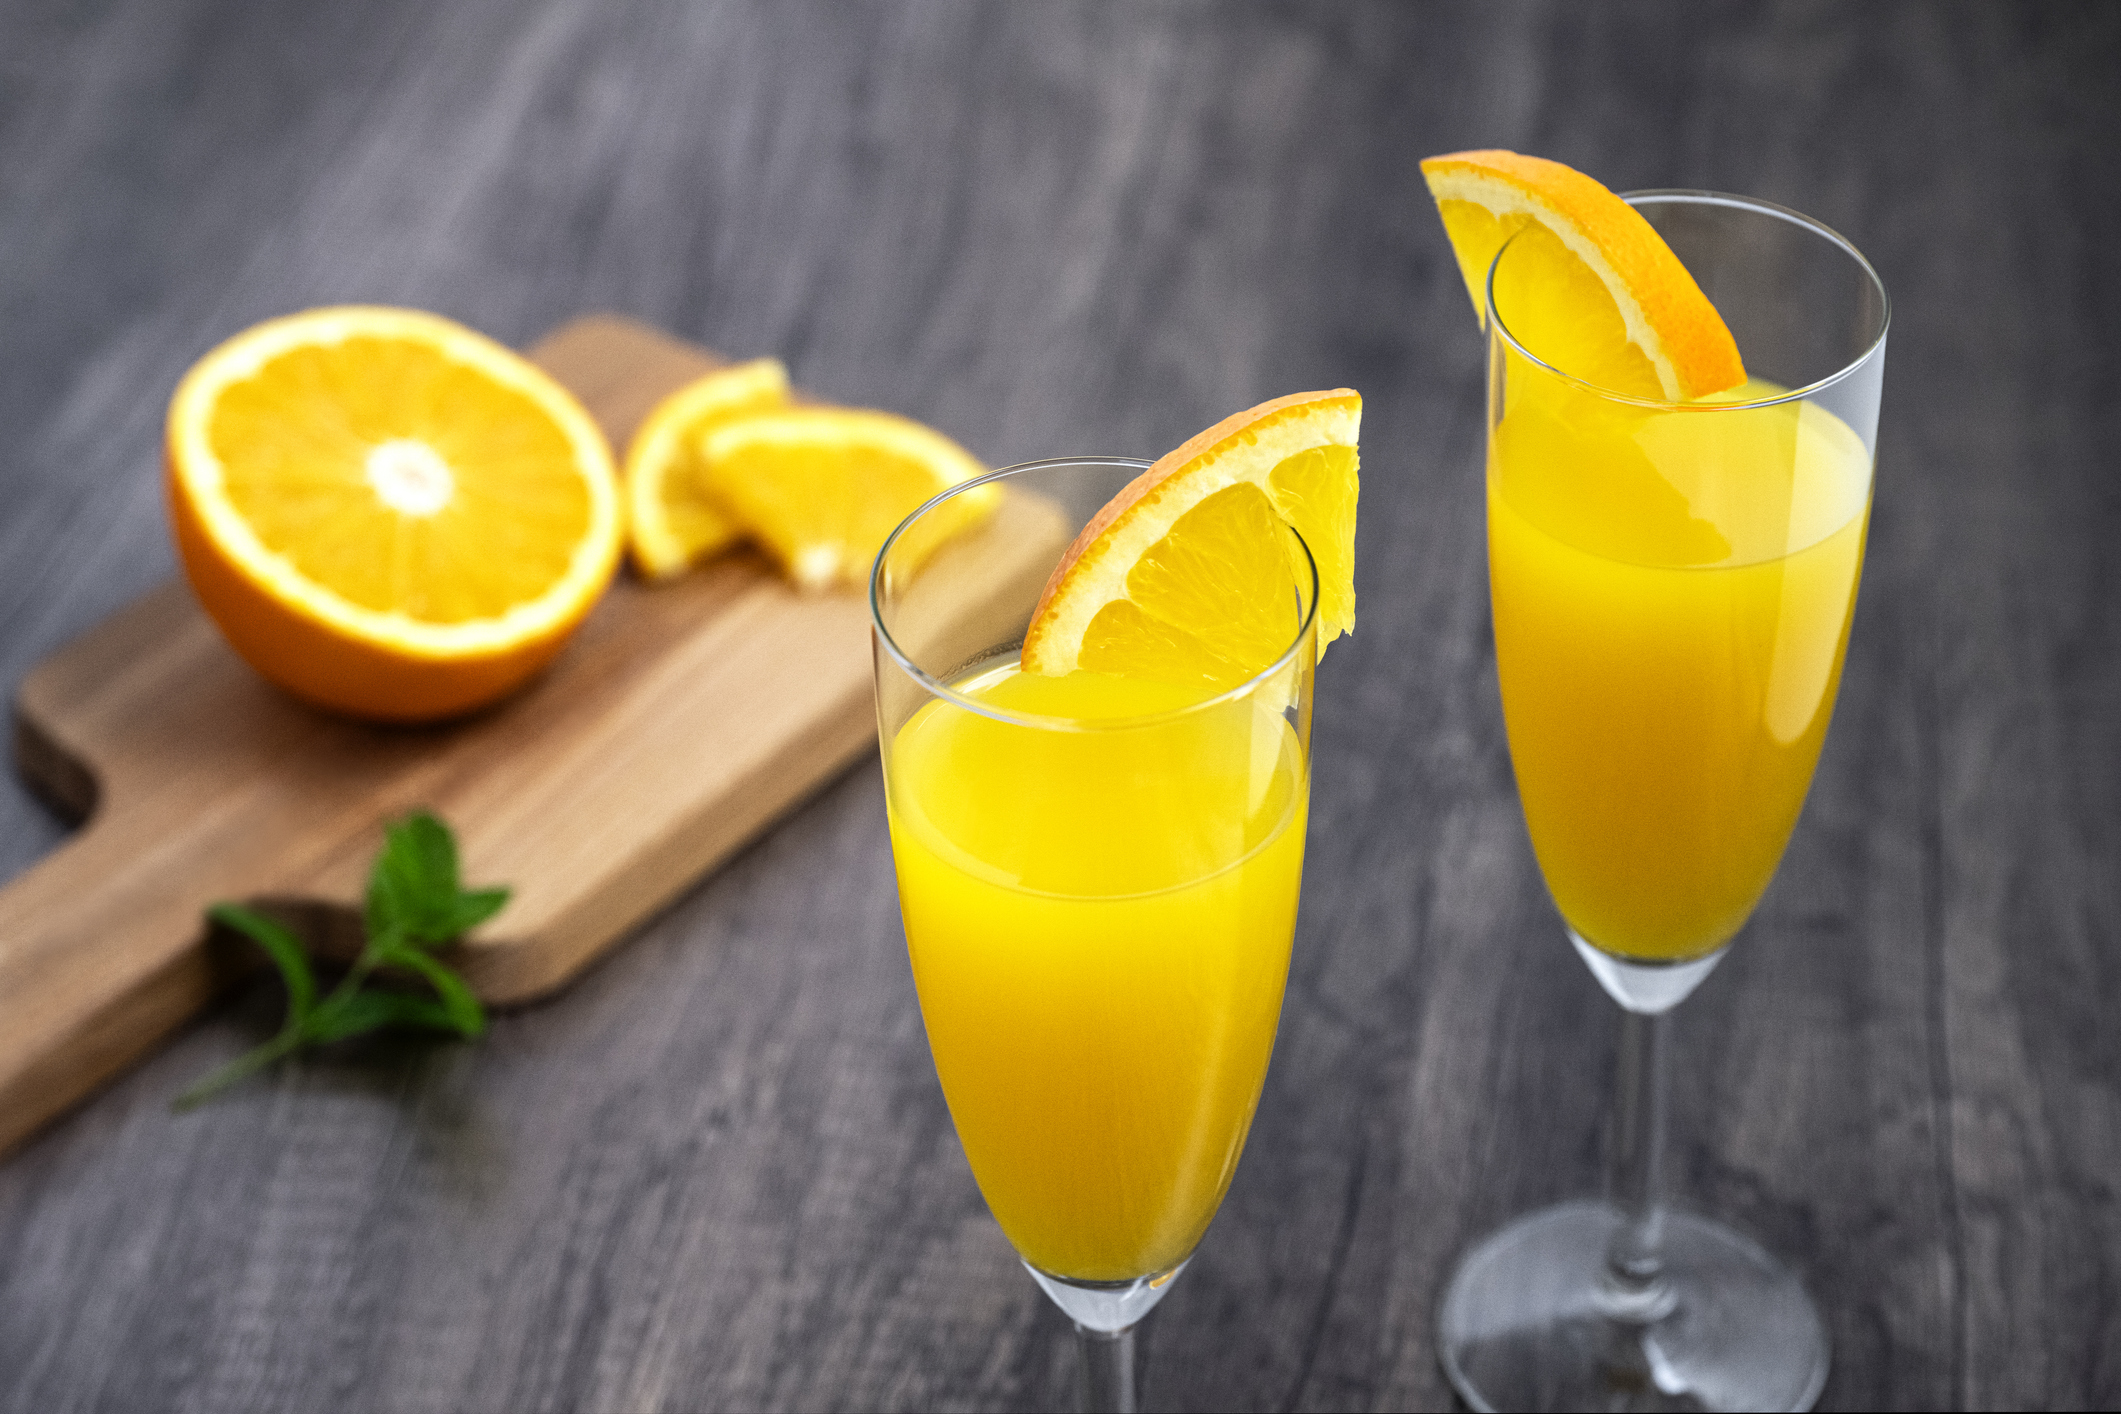 Mimosa cocktail (orange juice and Champagne)